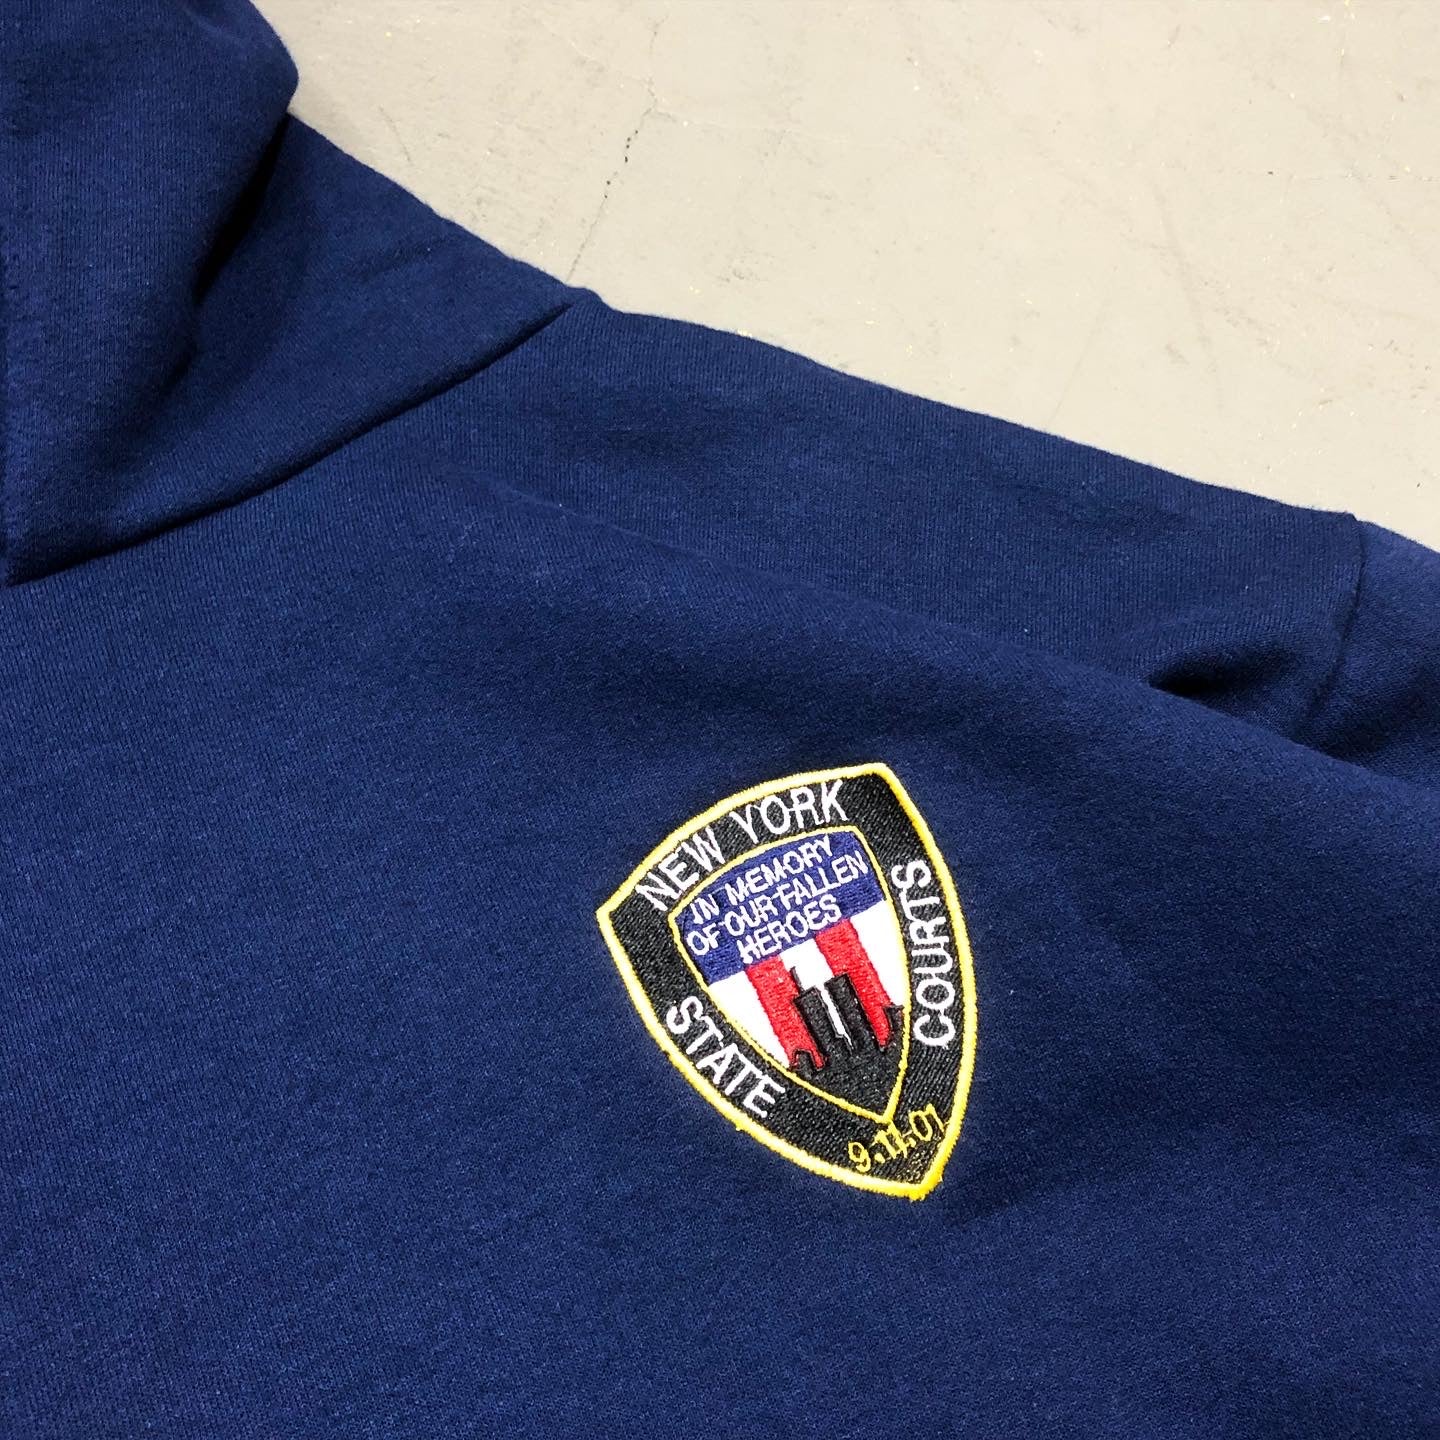 New York State Courts 9.11 Memorial Pullover Hoodie